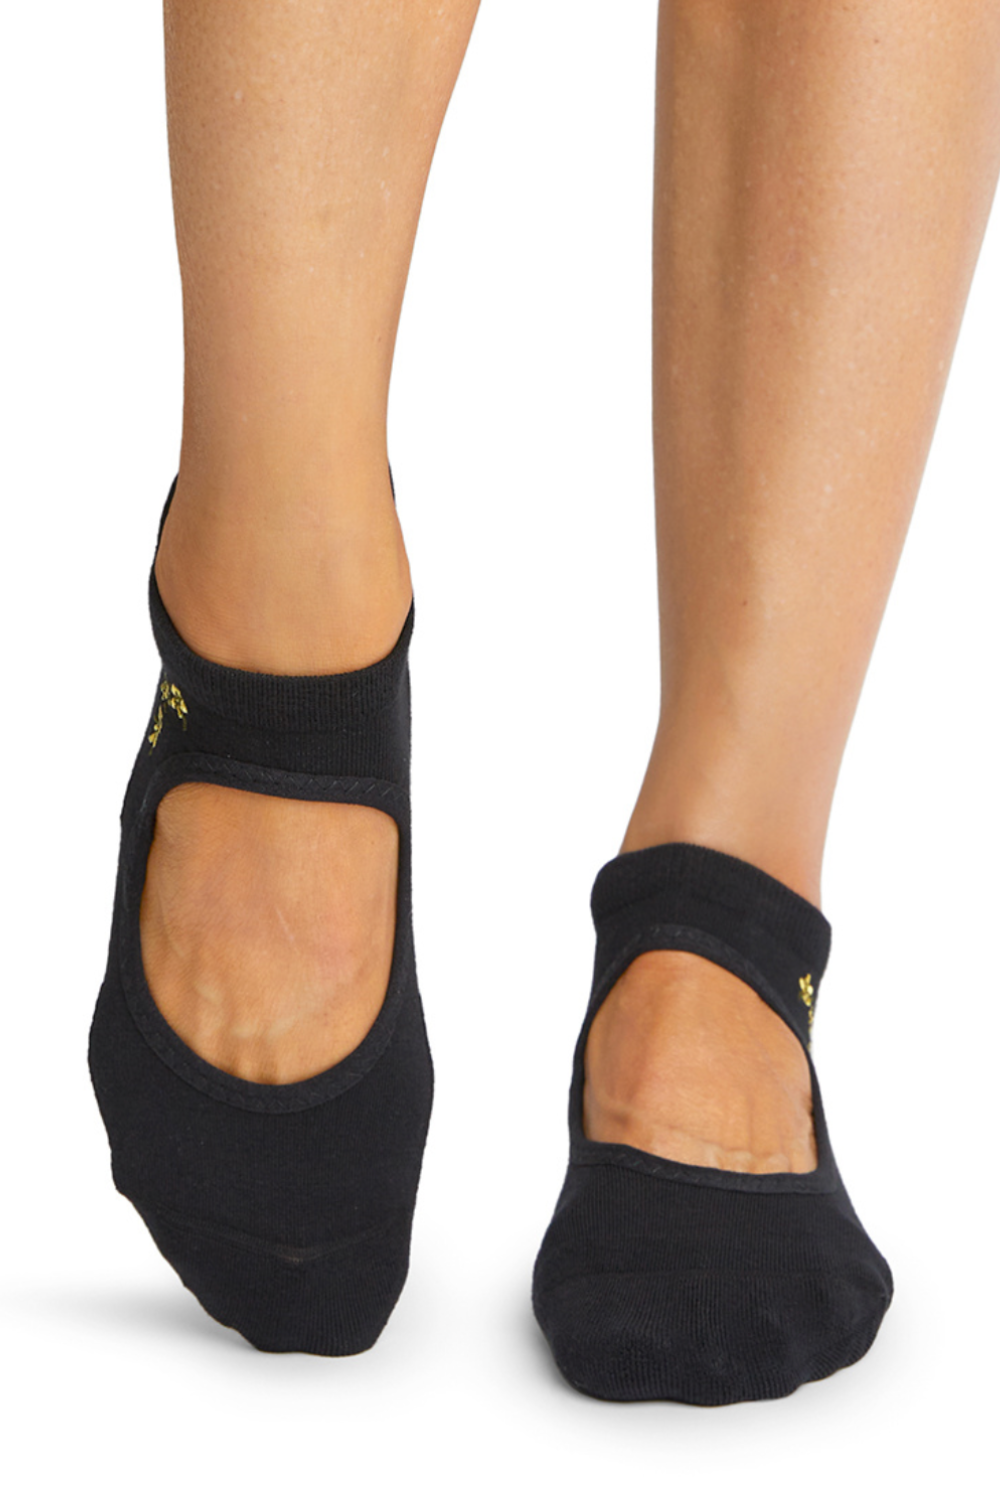 High density black rubber grip activewear socks for yoga, pilates, gym, and exercise from Tavi featured by sustainable women's activewear brand Jilla Active